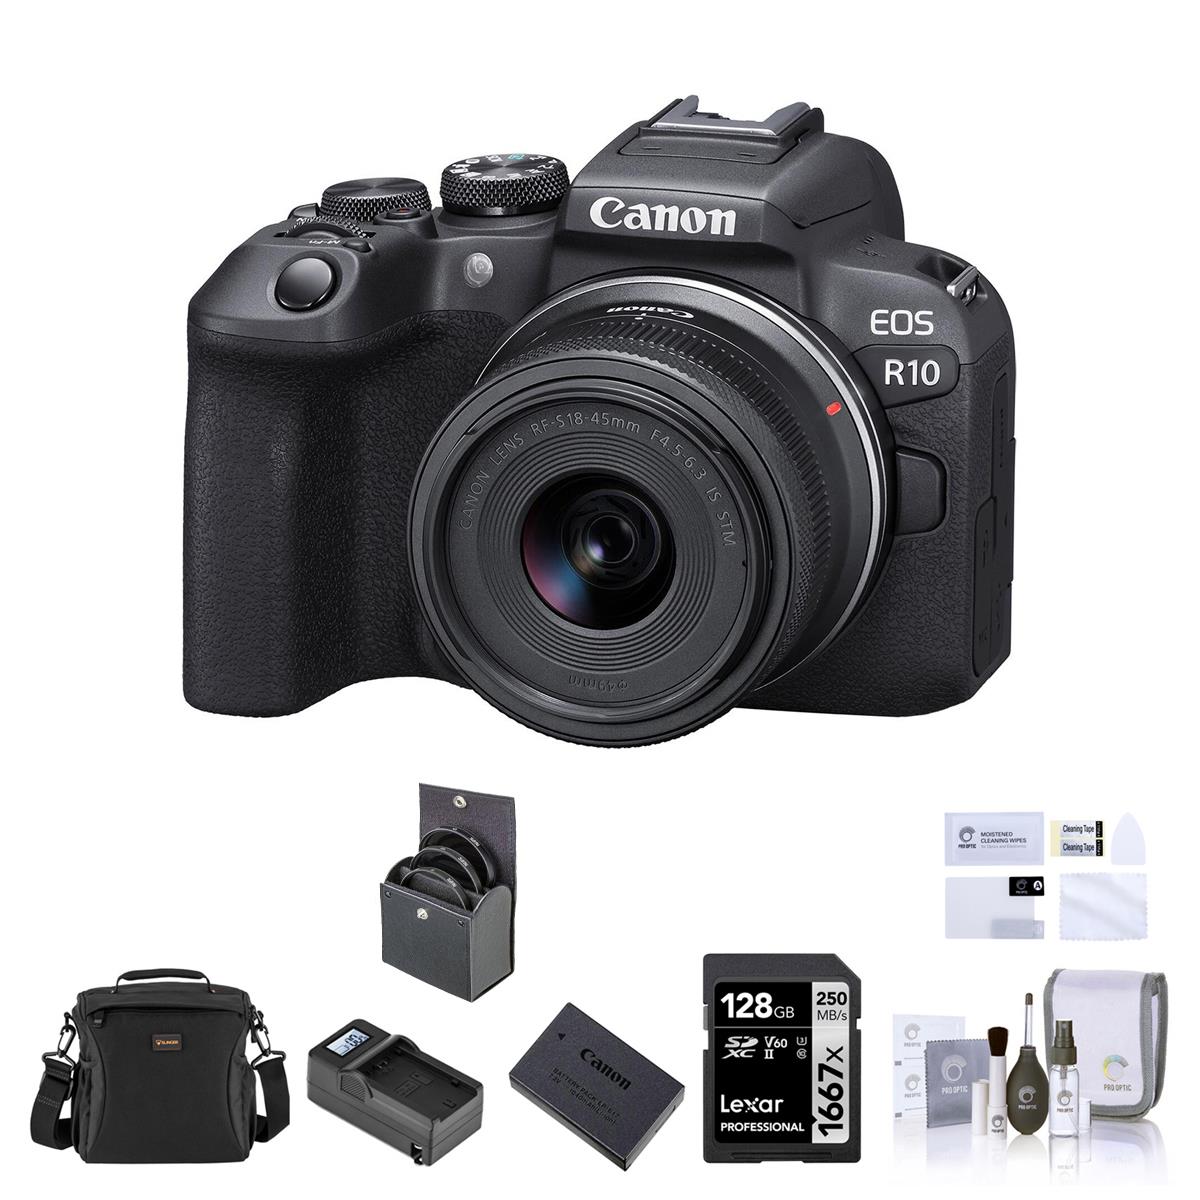 Image of Canon EOS R10 Camera with RF-S 18-45mm f/4.5-6.3 IS STM Lens and Essentials Kit